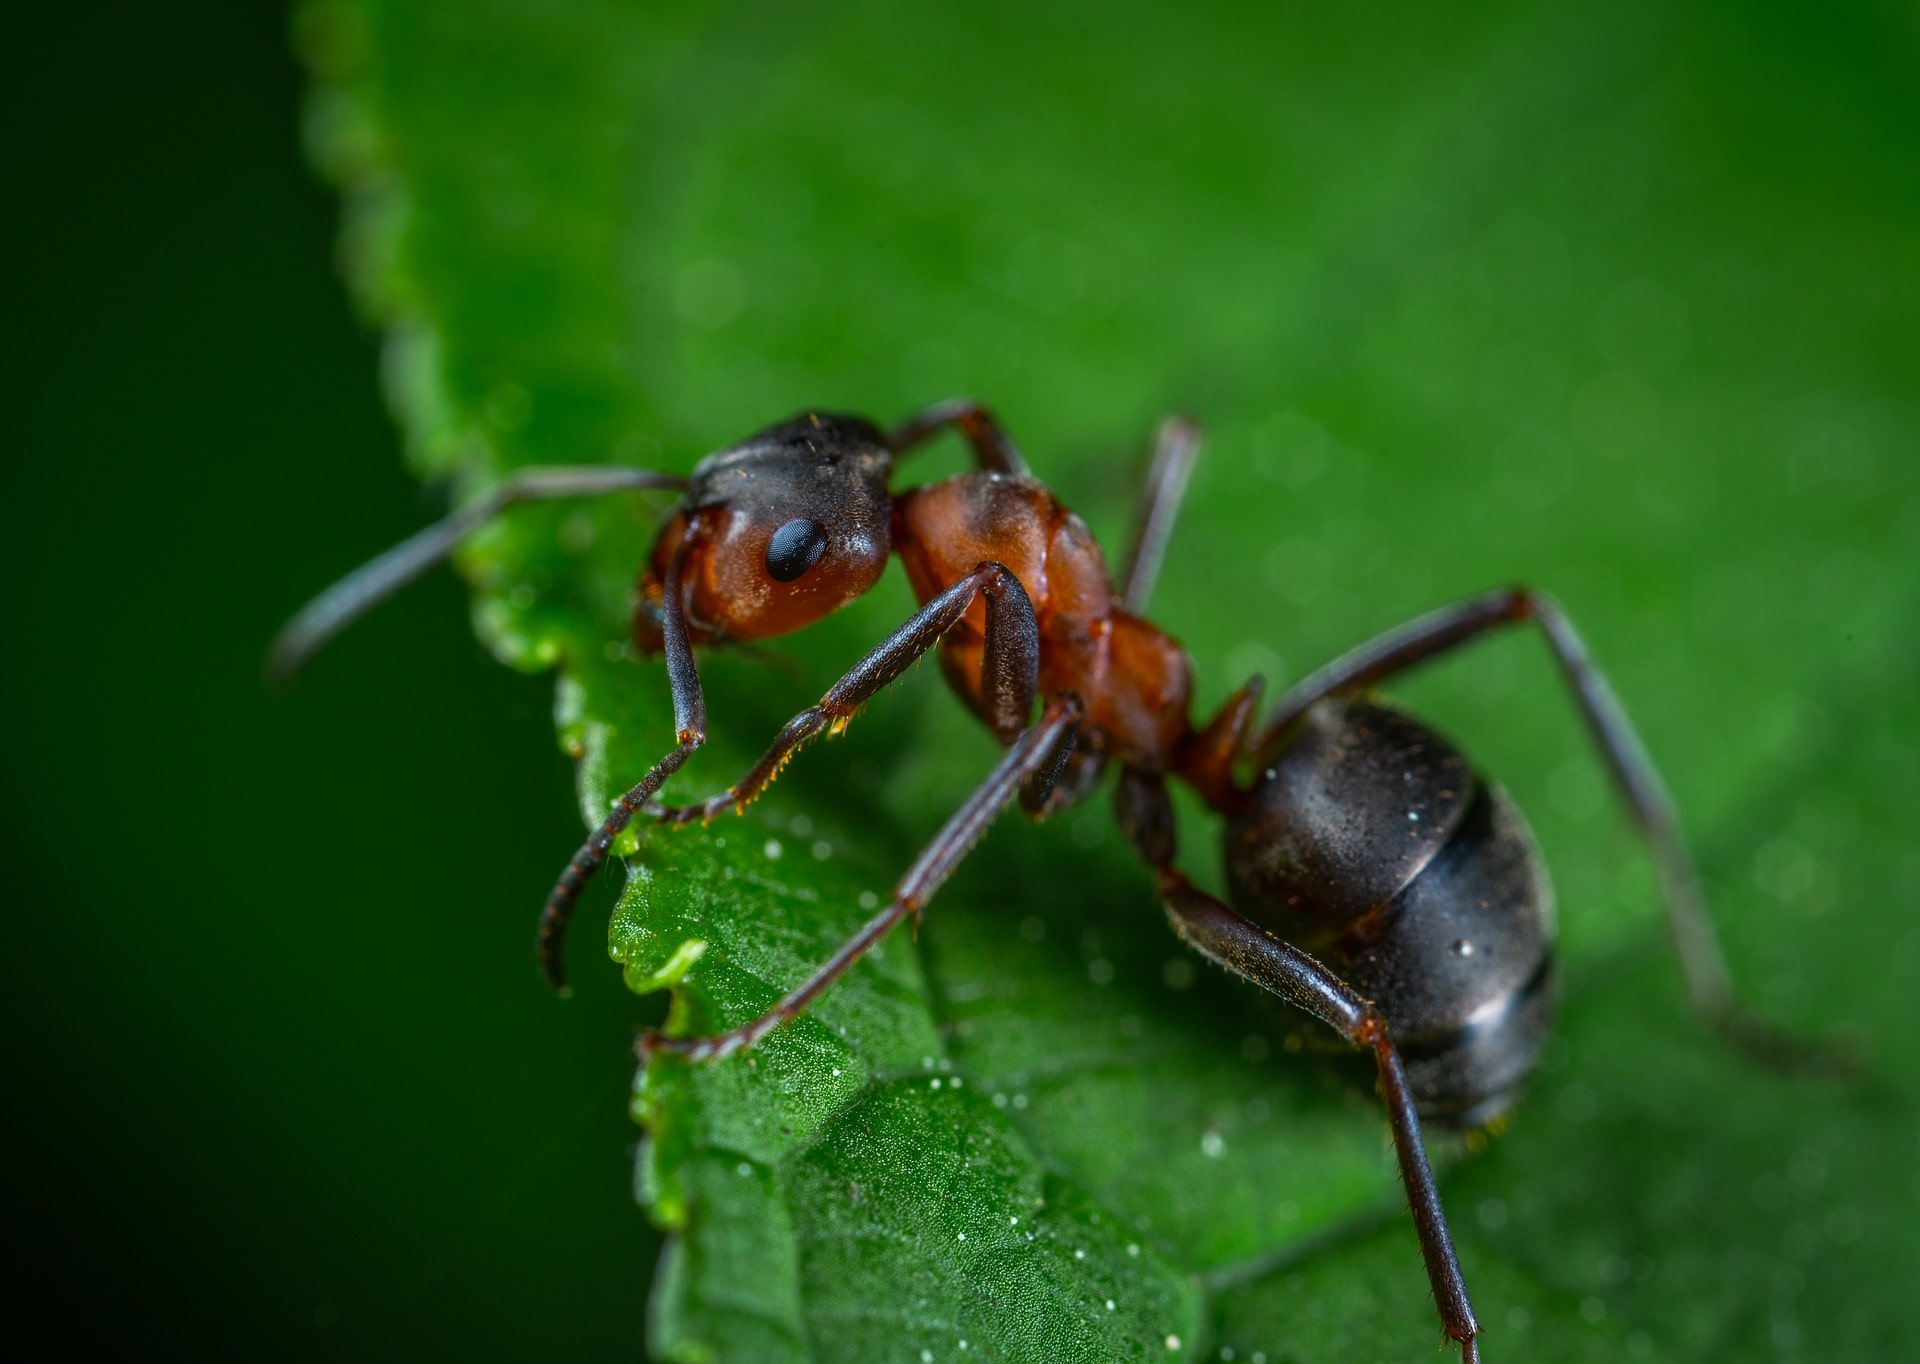 Close up view of a red ant.